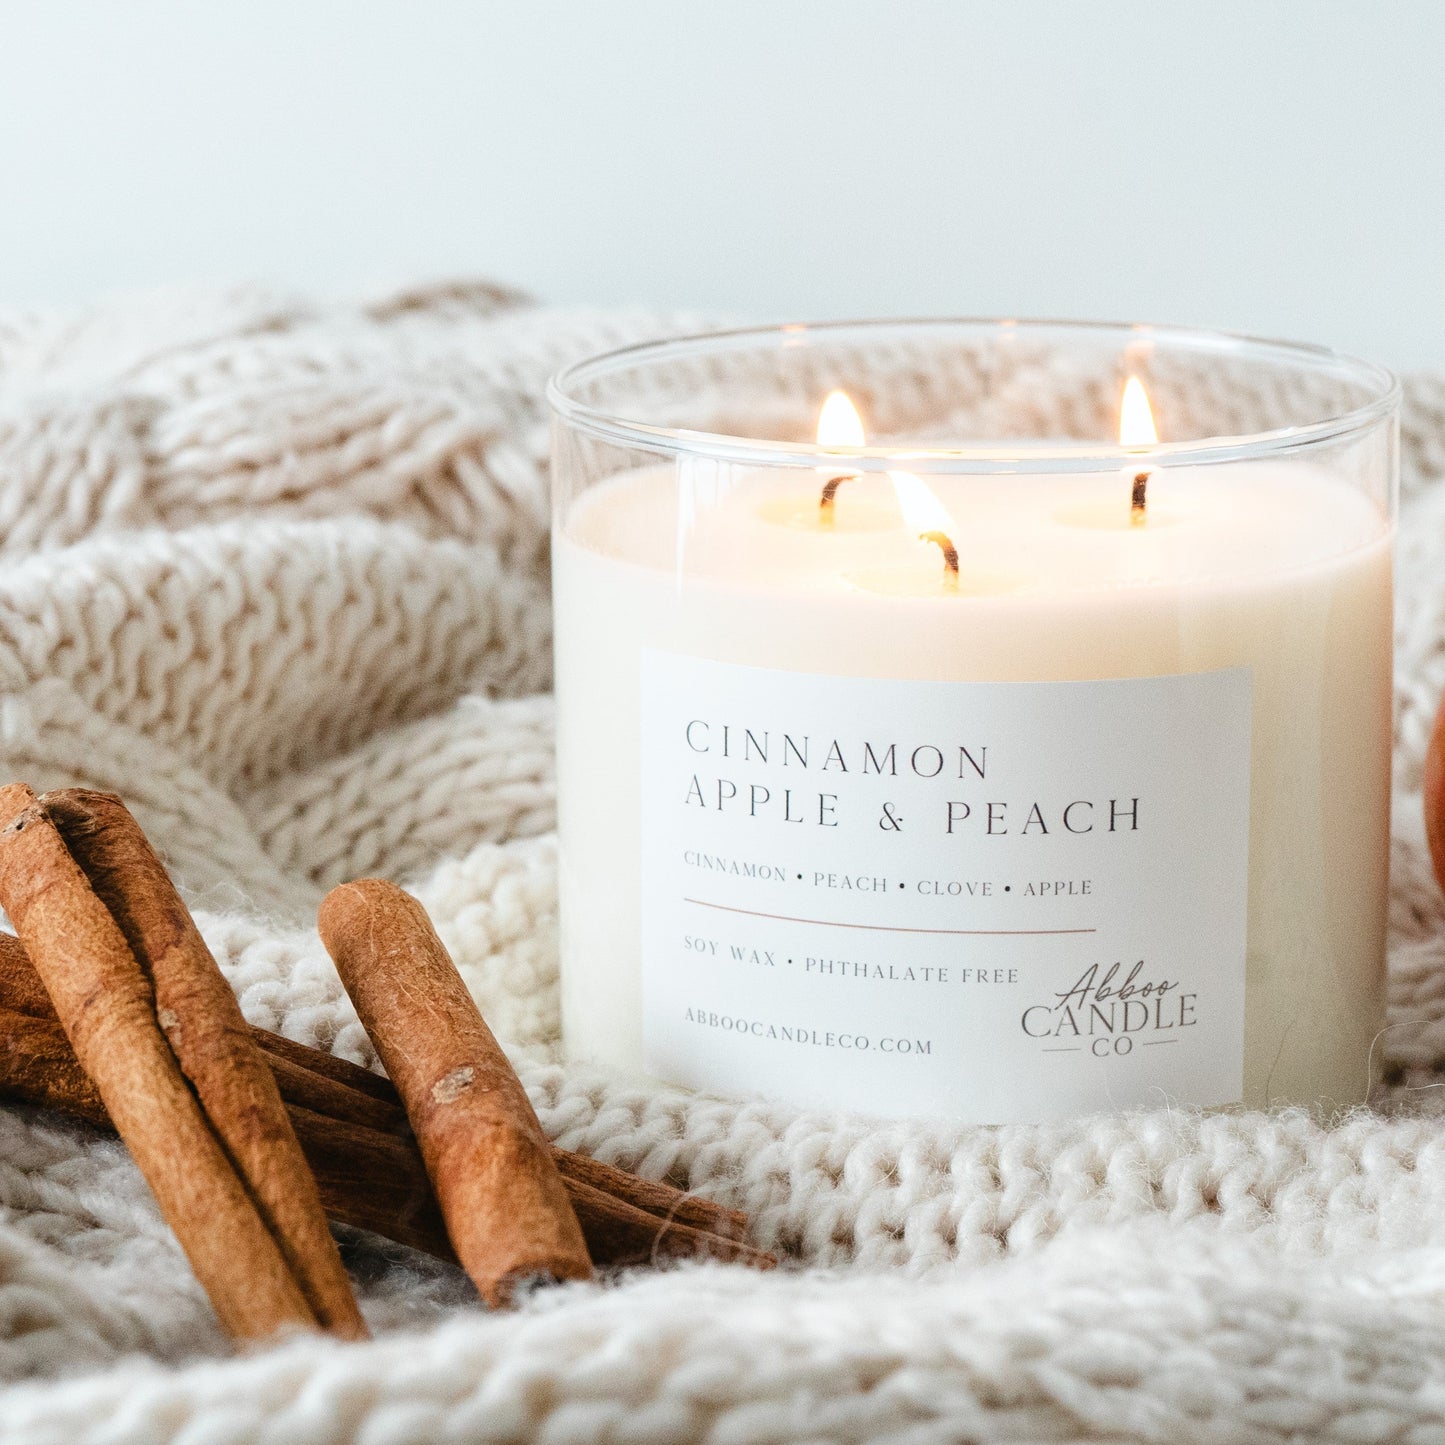 Cinnamon Apple and Peach 3-Wick Soy Candle - Abboo Candle Co® Wholesale